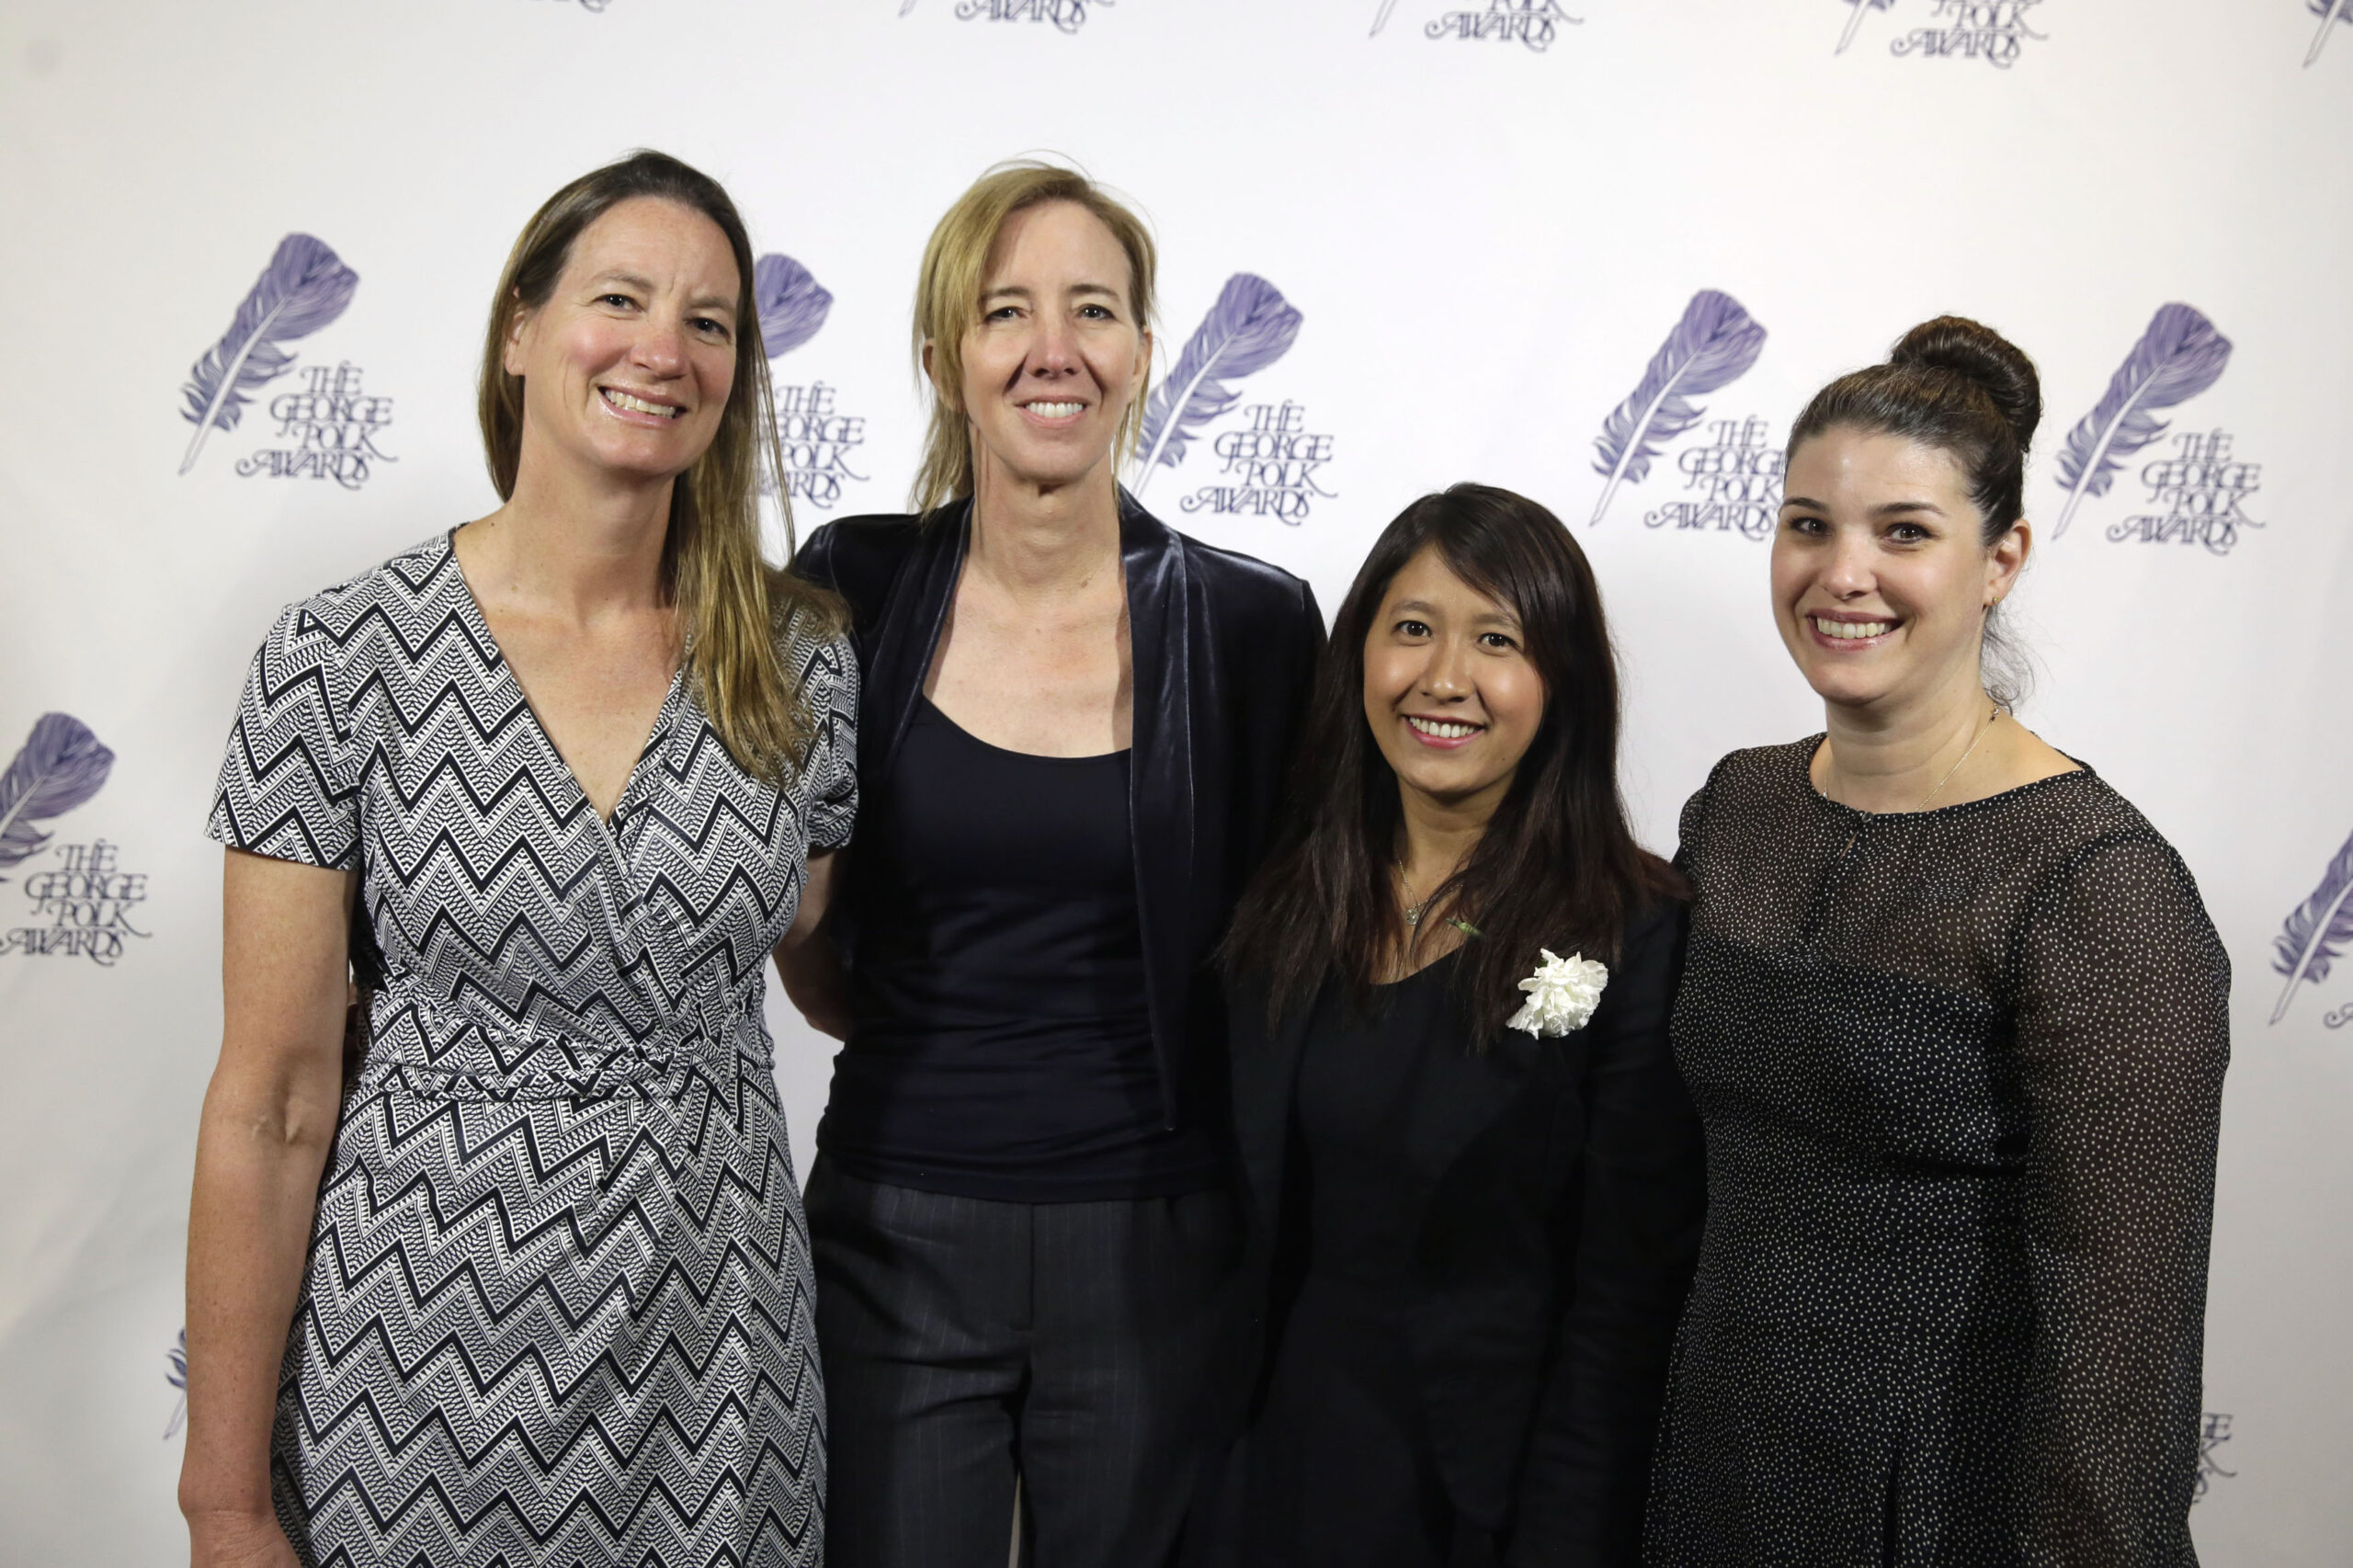 The AP team that investigated seafood caught by slaves poses at the George Polk Awards luncheon in New York,  Friday, April 8, 2016. From left: Martha Mendoza, Robin McDowell, Esther Htusan and Margie Mason. (AP Photo/Richard Drew)